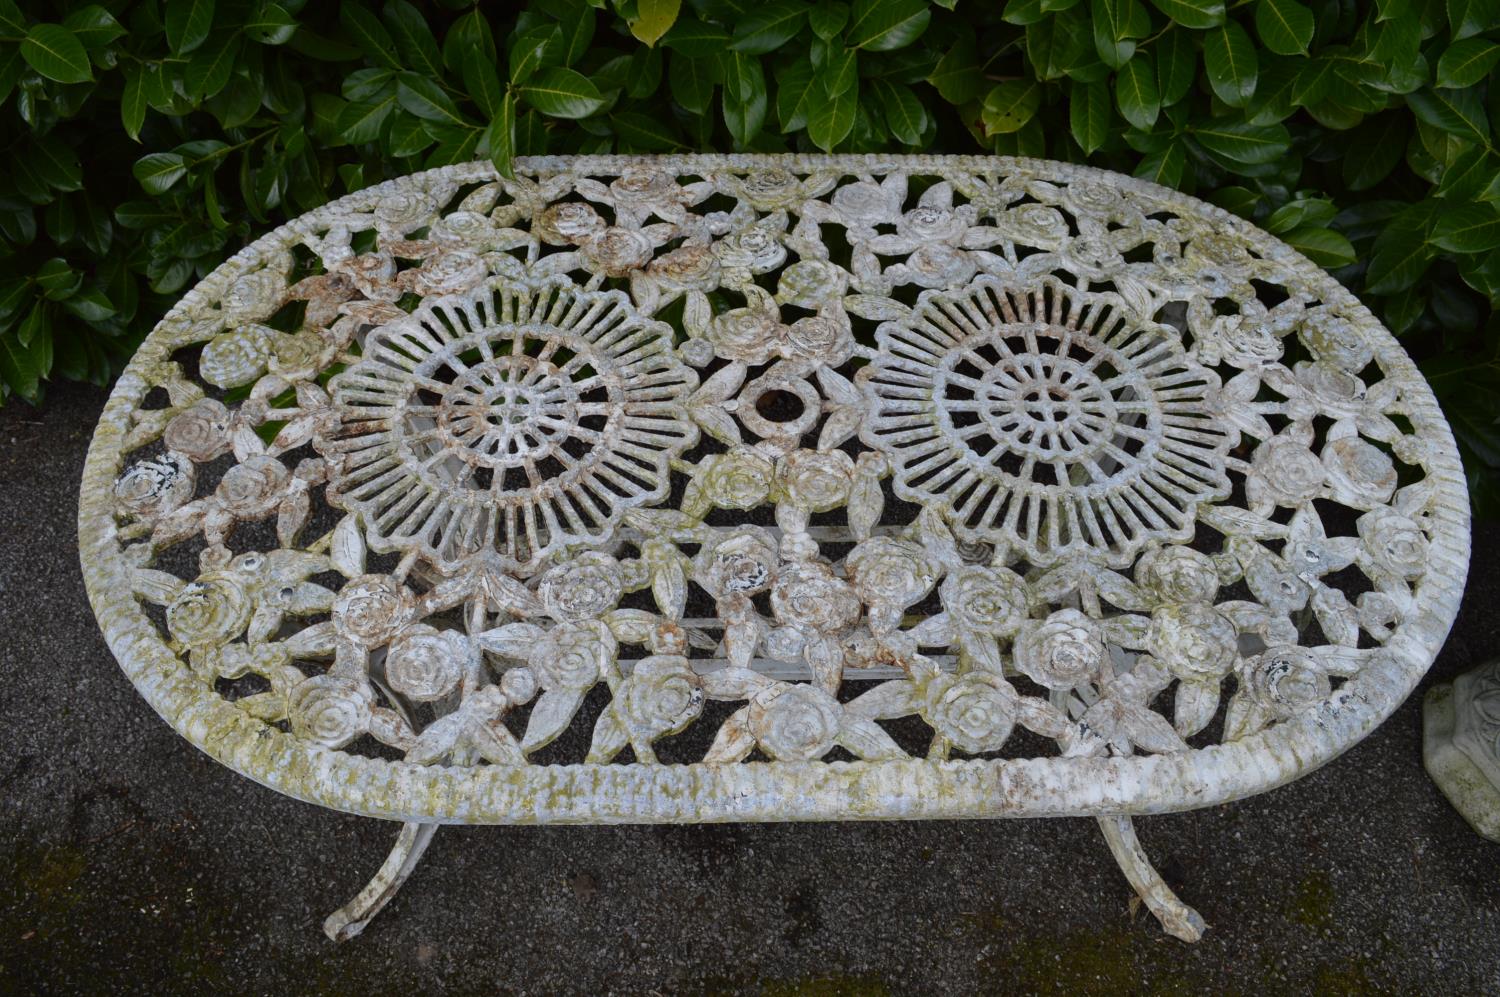 White painted aluminium oval garden table - 140cm x 86cm x 75cm tall Please note descriptions are - Image 2 of 2